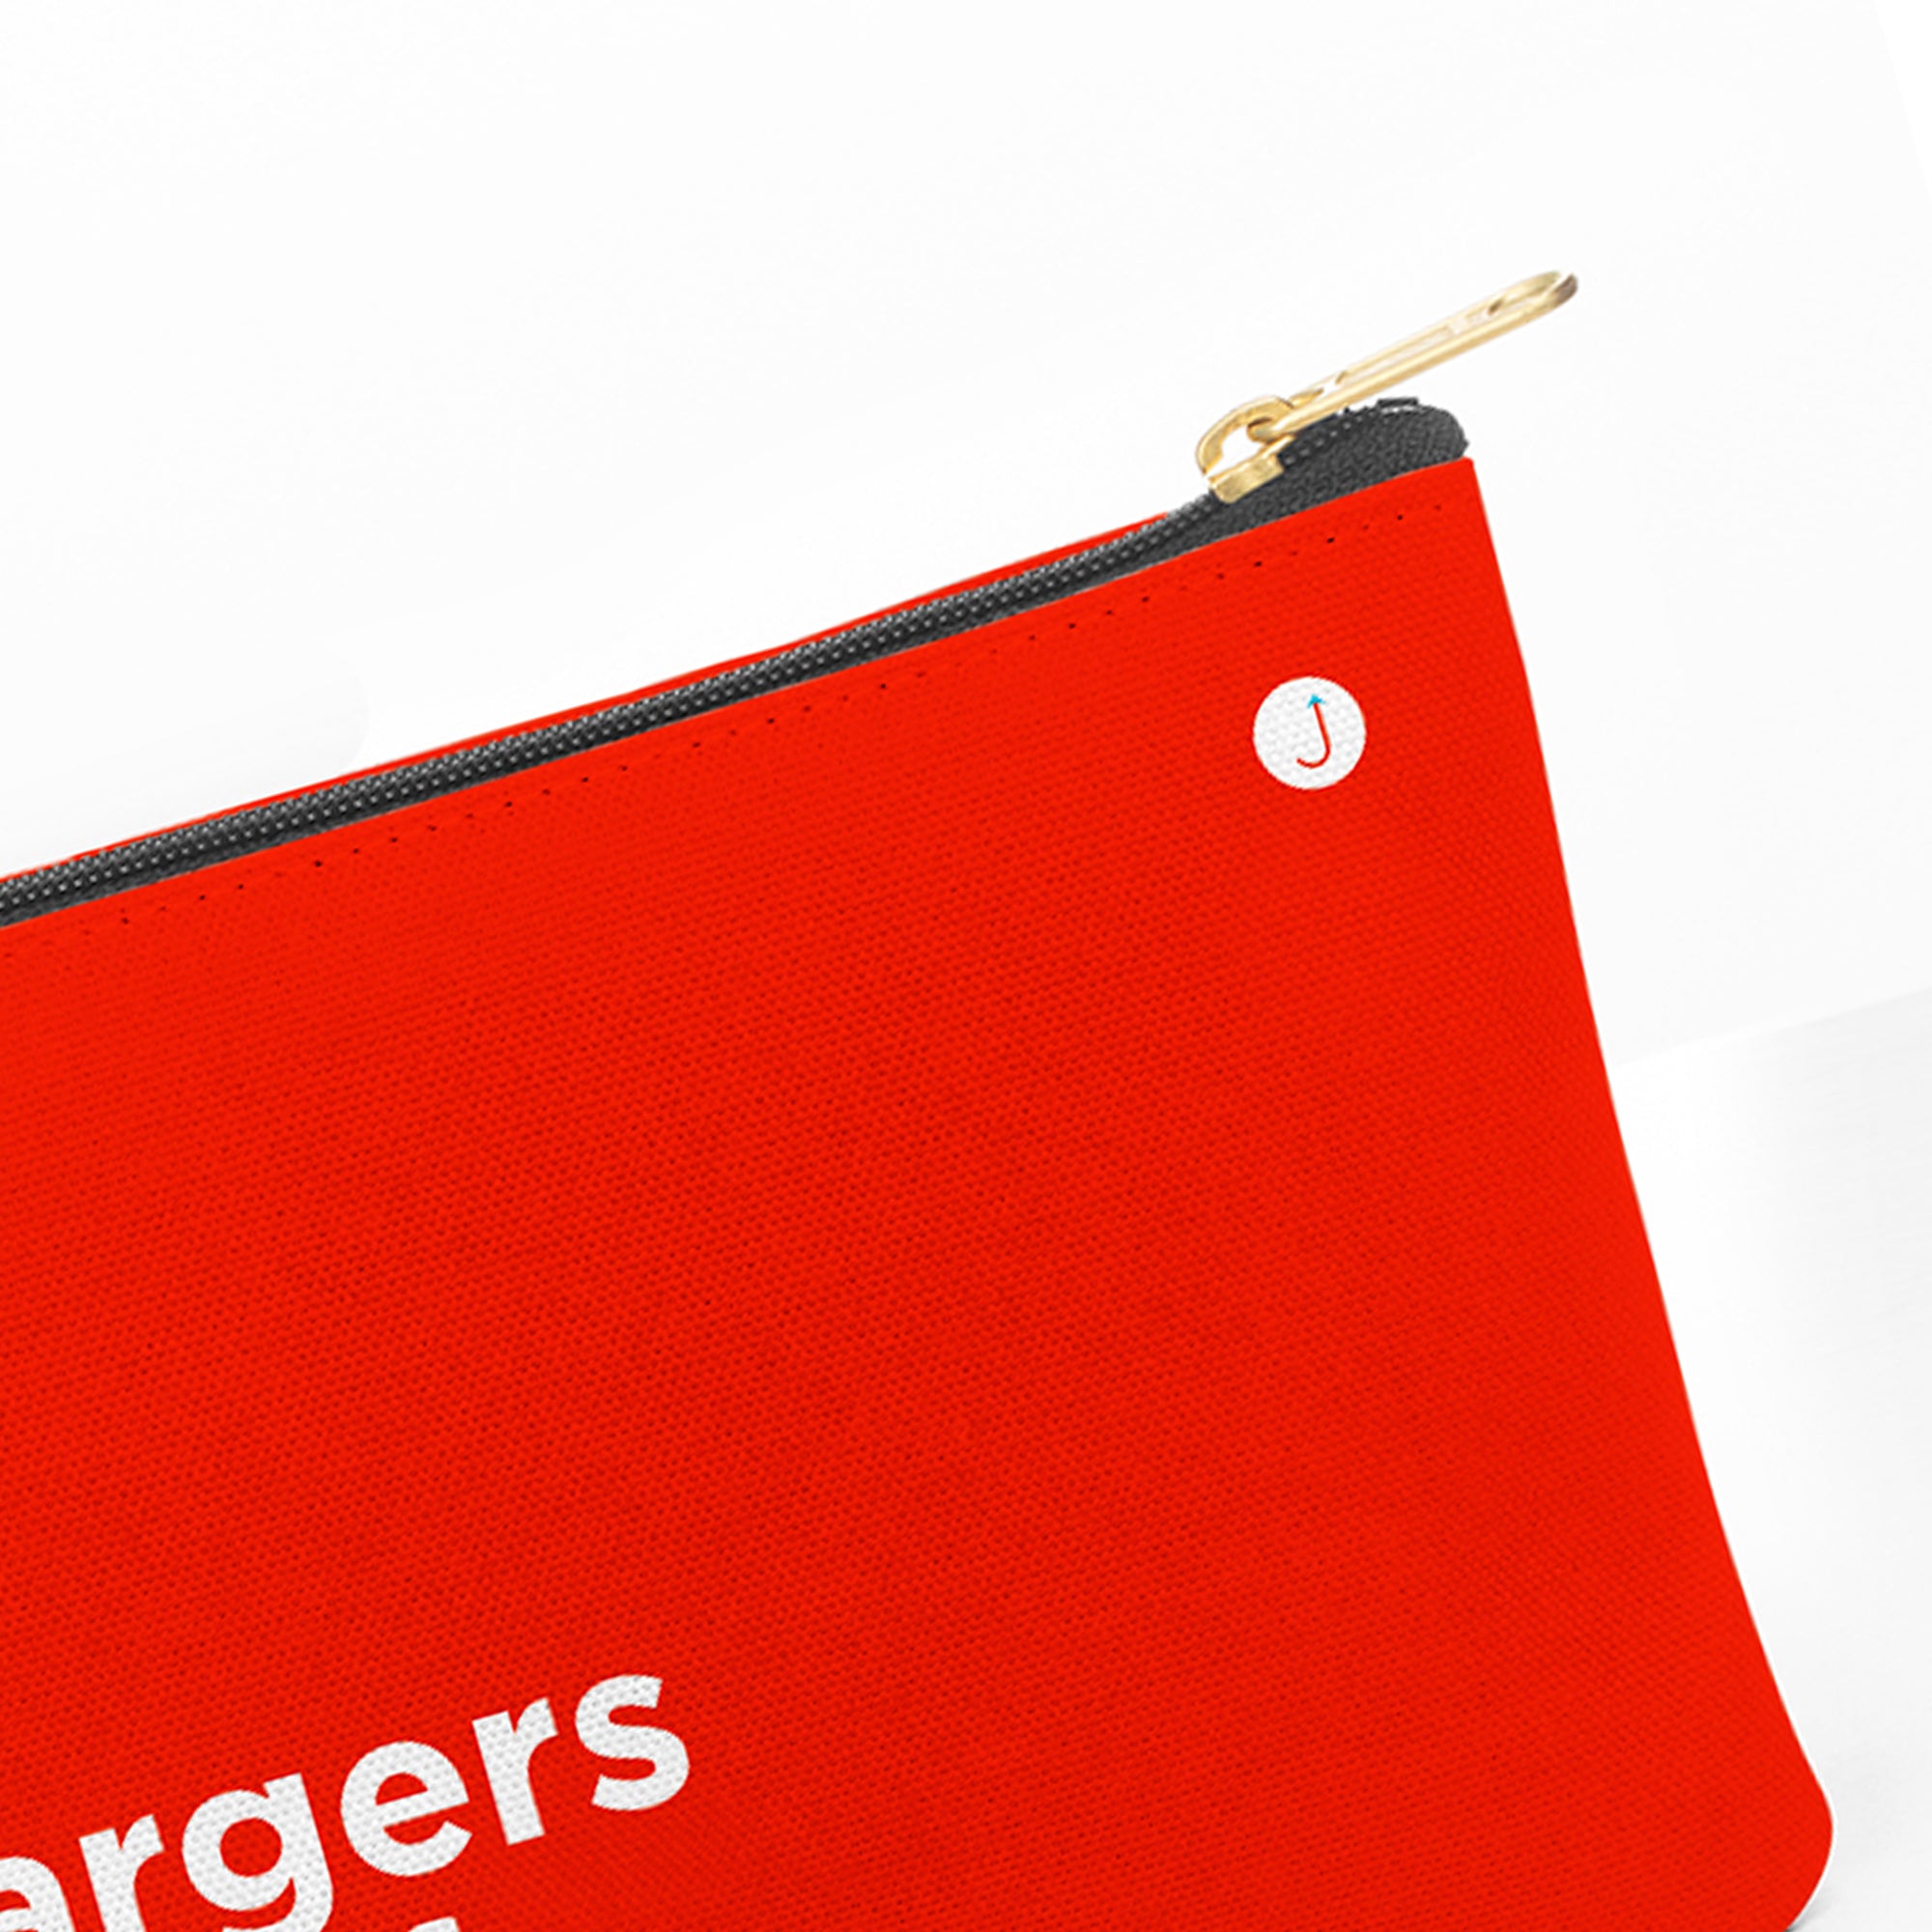 Chargers & Stuff Travel Accessory Pouch